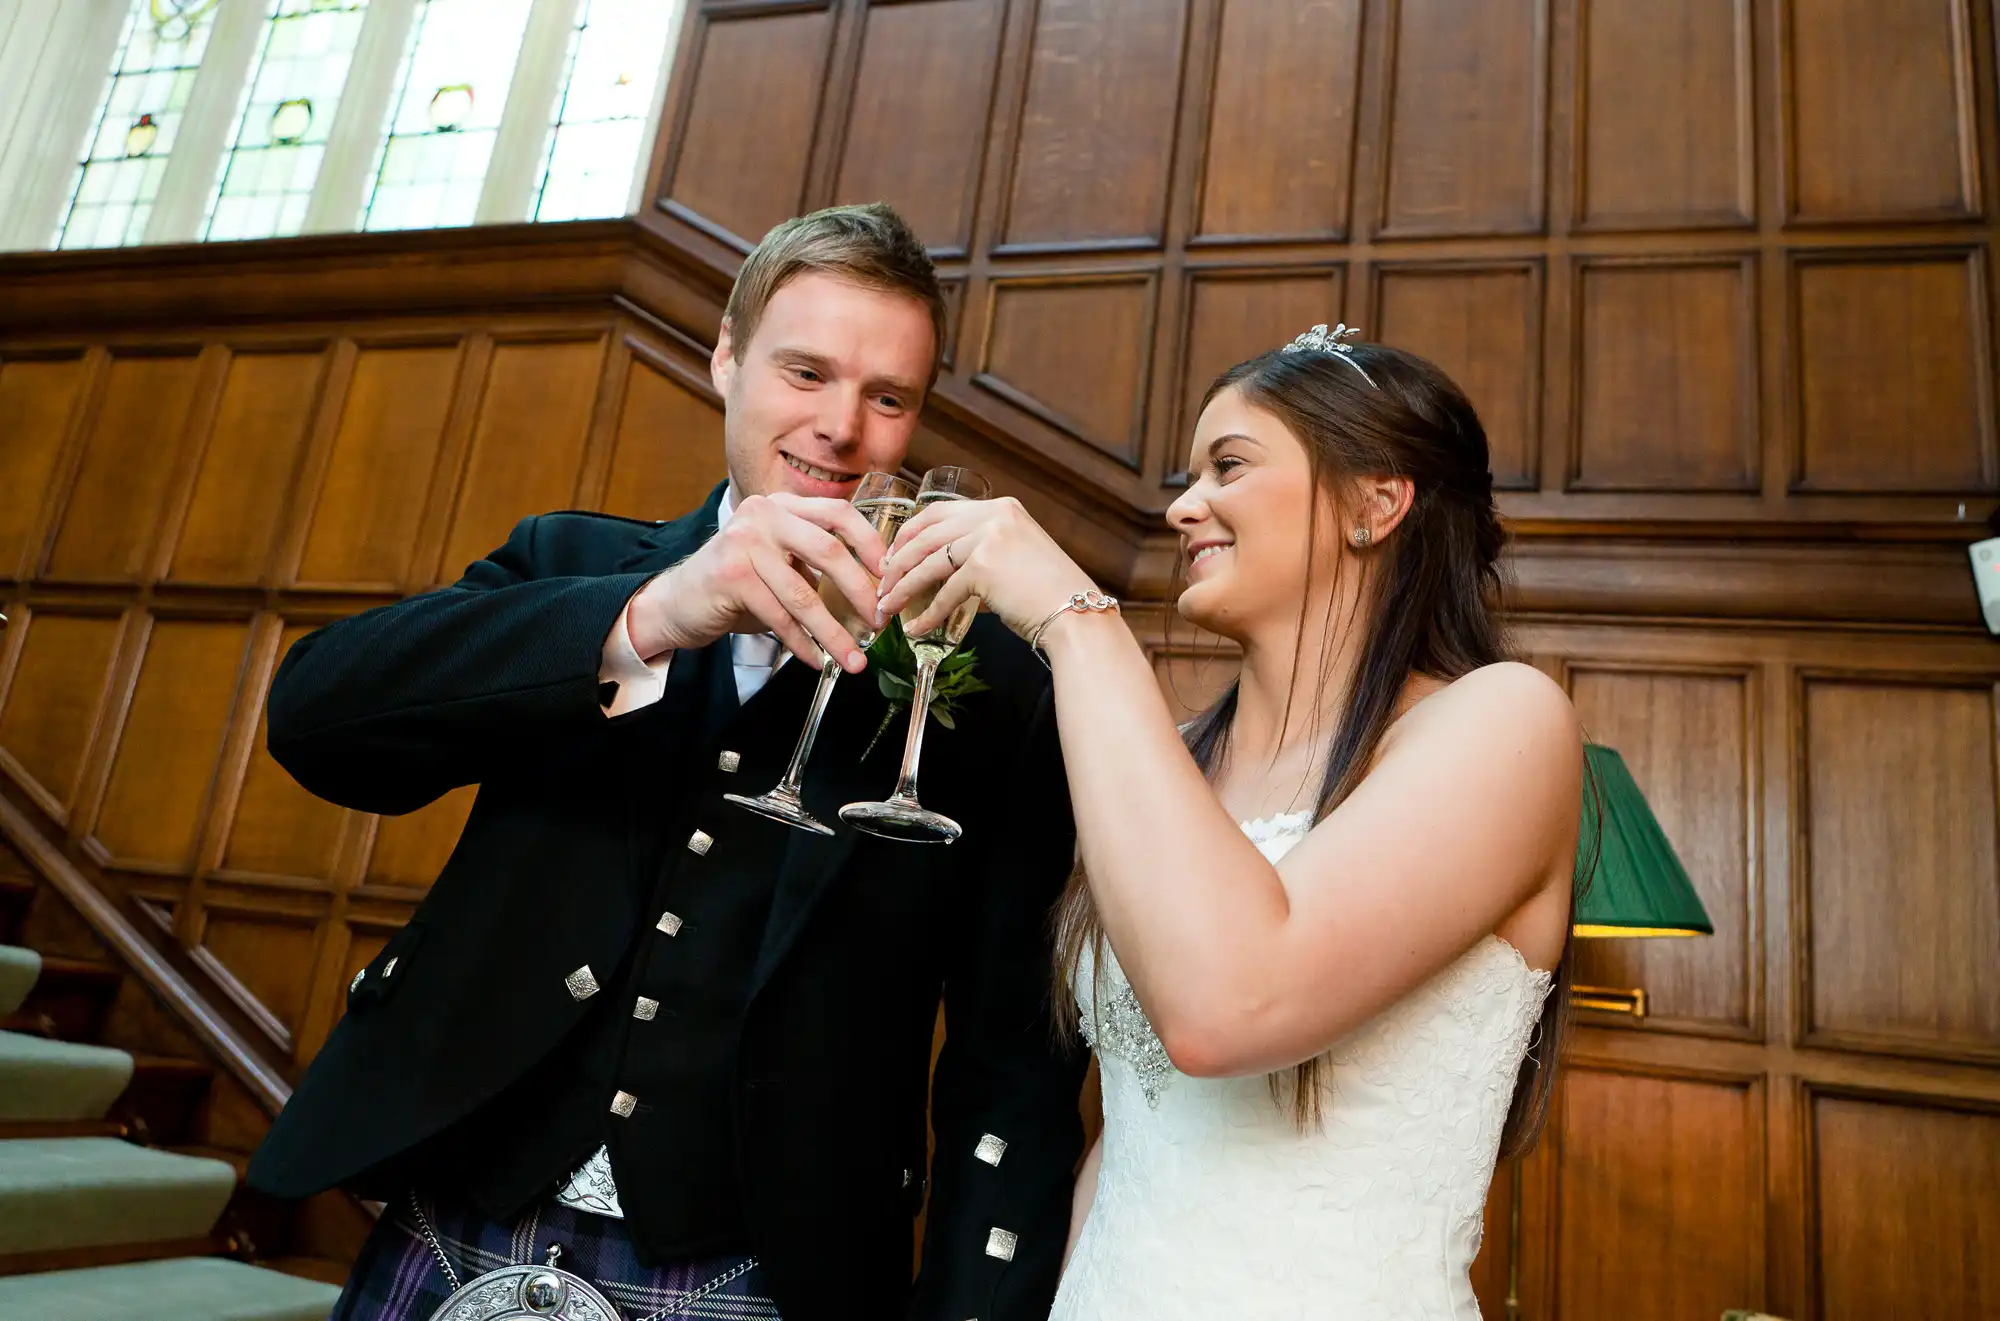 A bride and groom in wedding attire, clinking glasses in a toast, smiling in a room with wood paneling and stained glass windows.